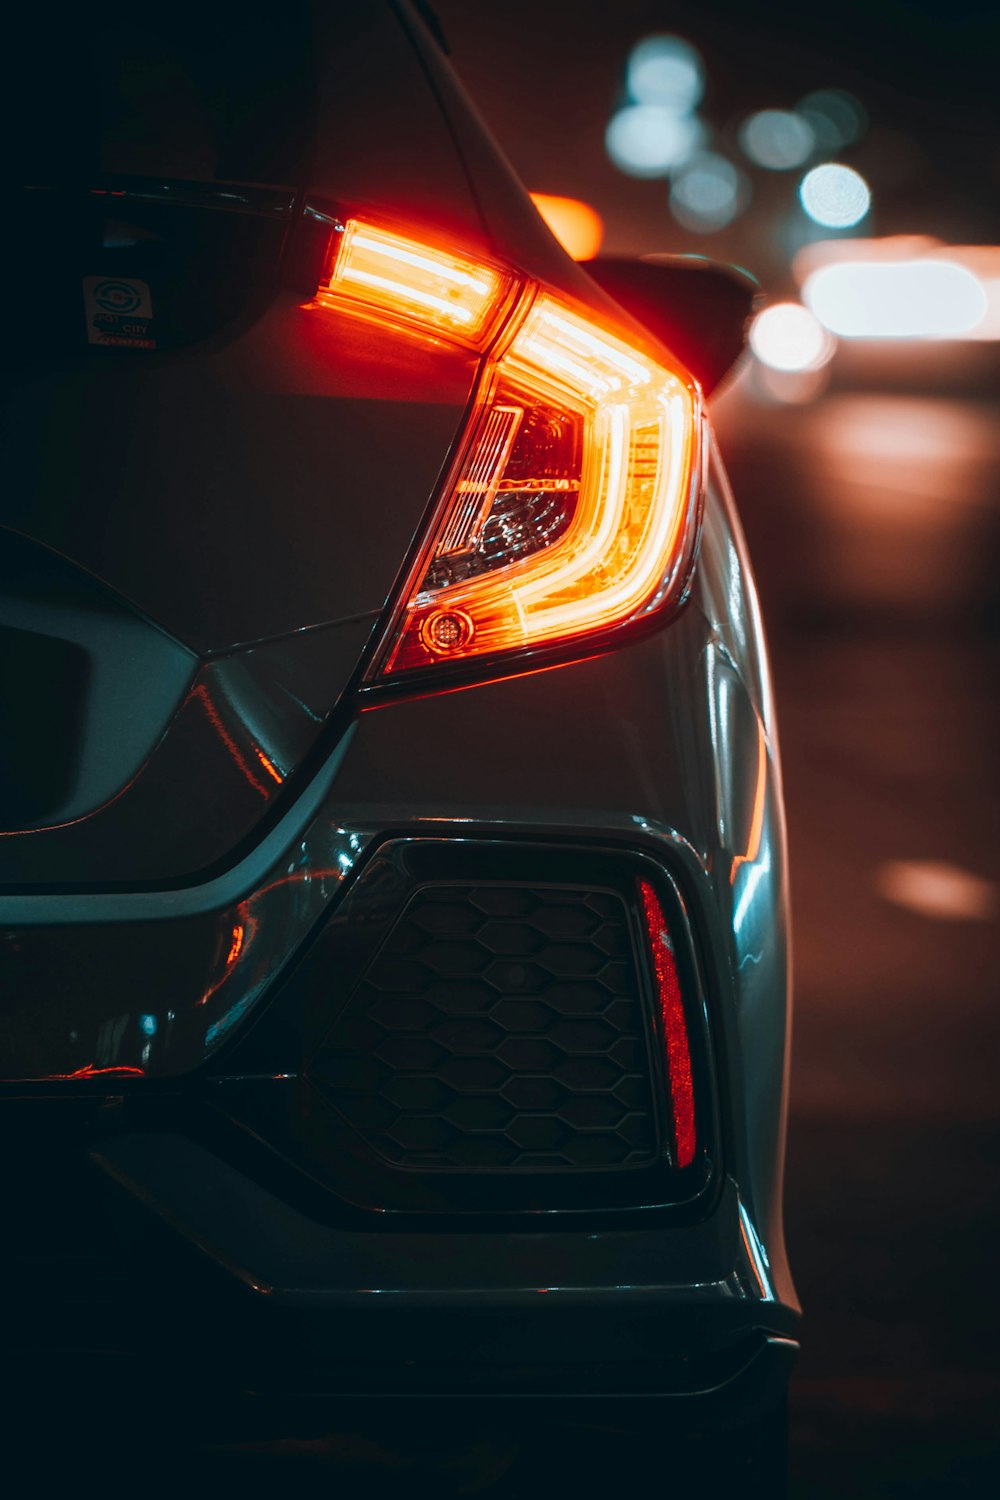 500+ Honda Civic Pictures [HD] | Download Free Images on Unsplash